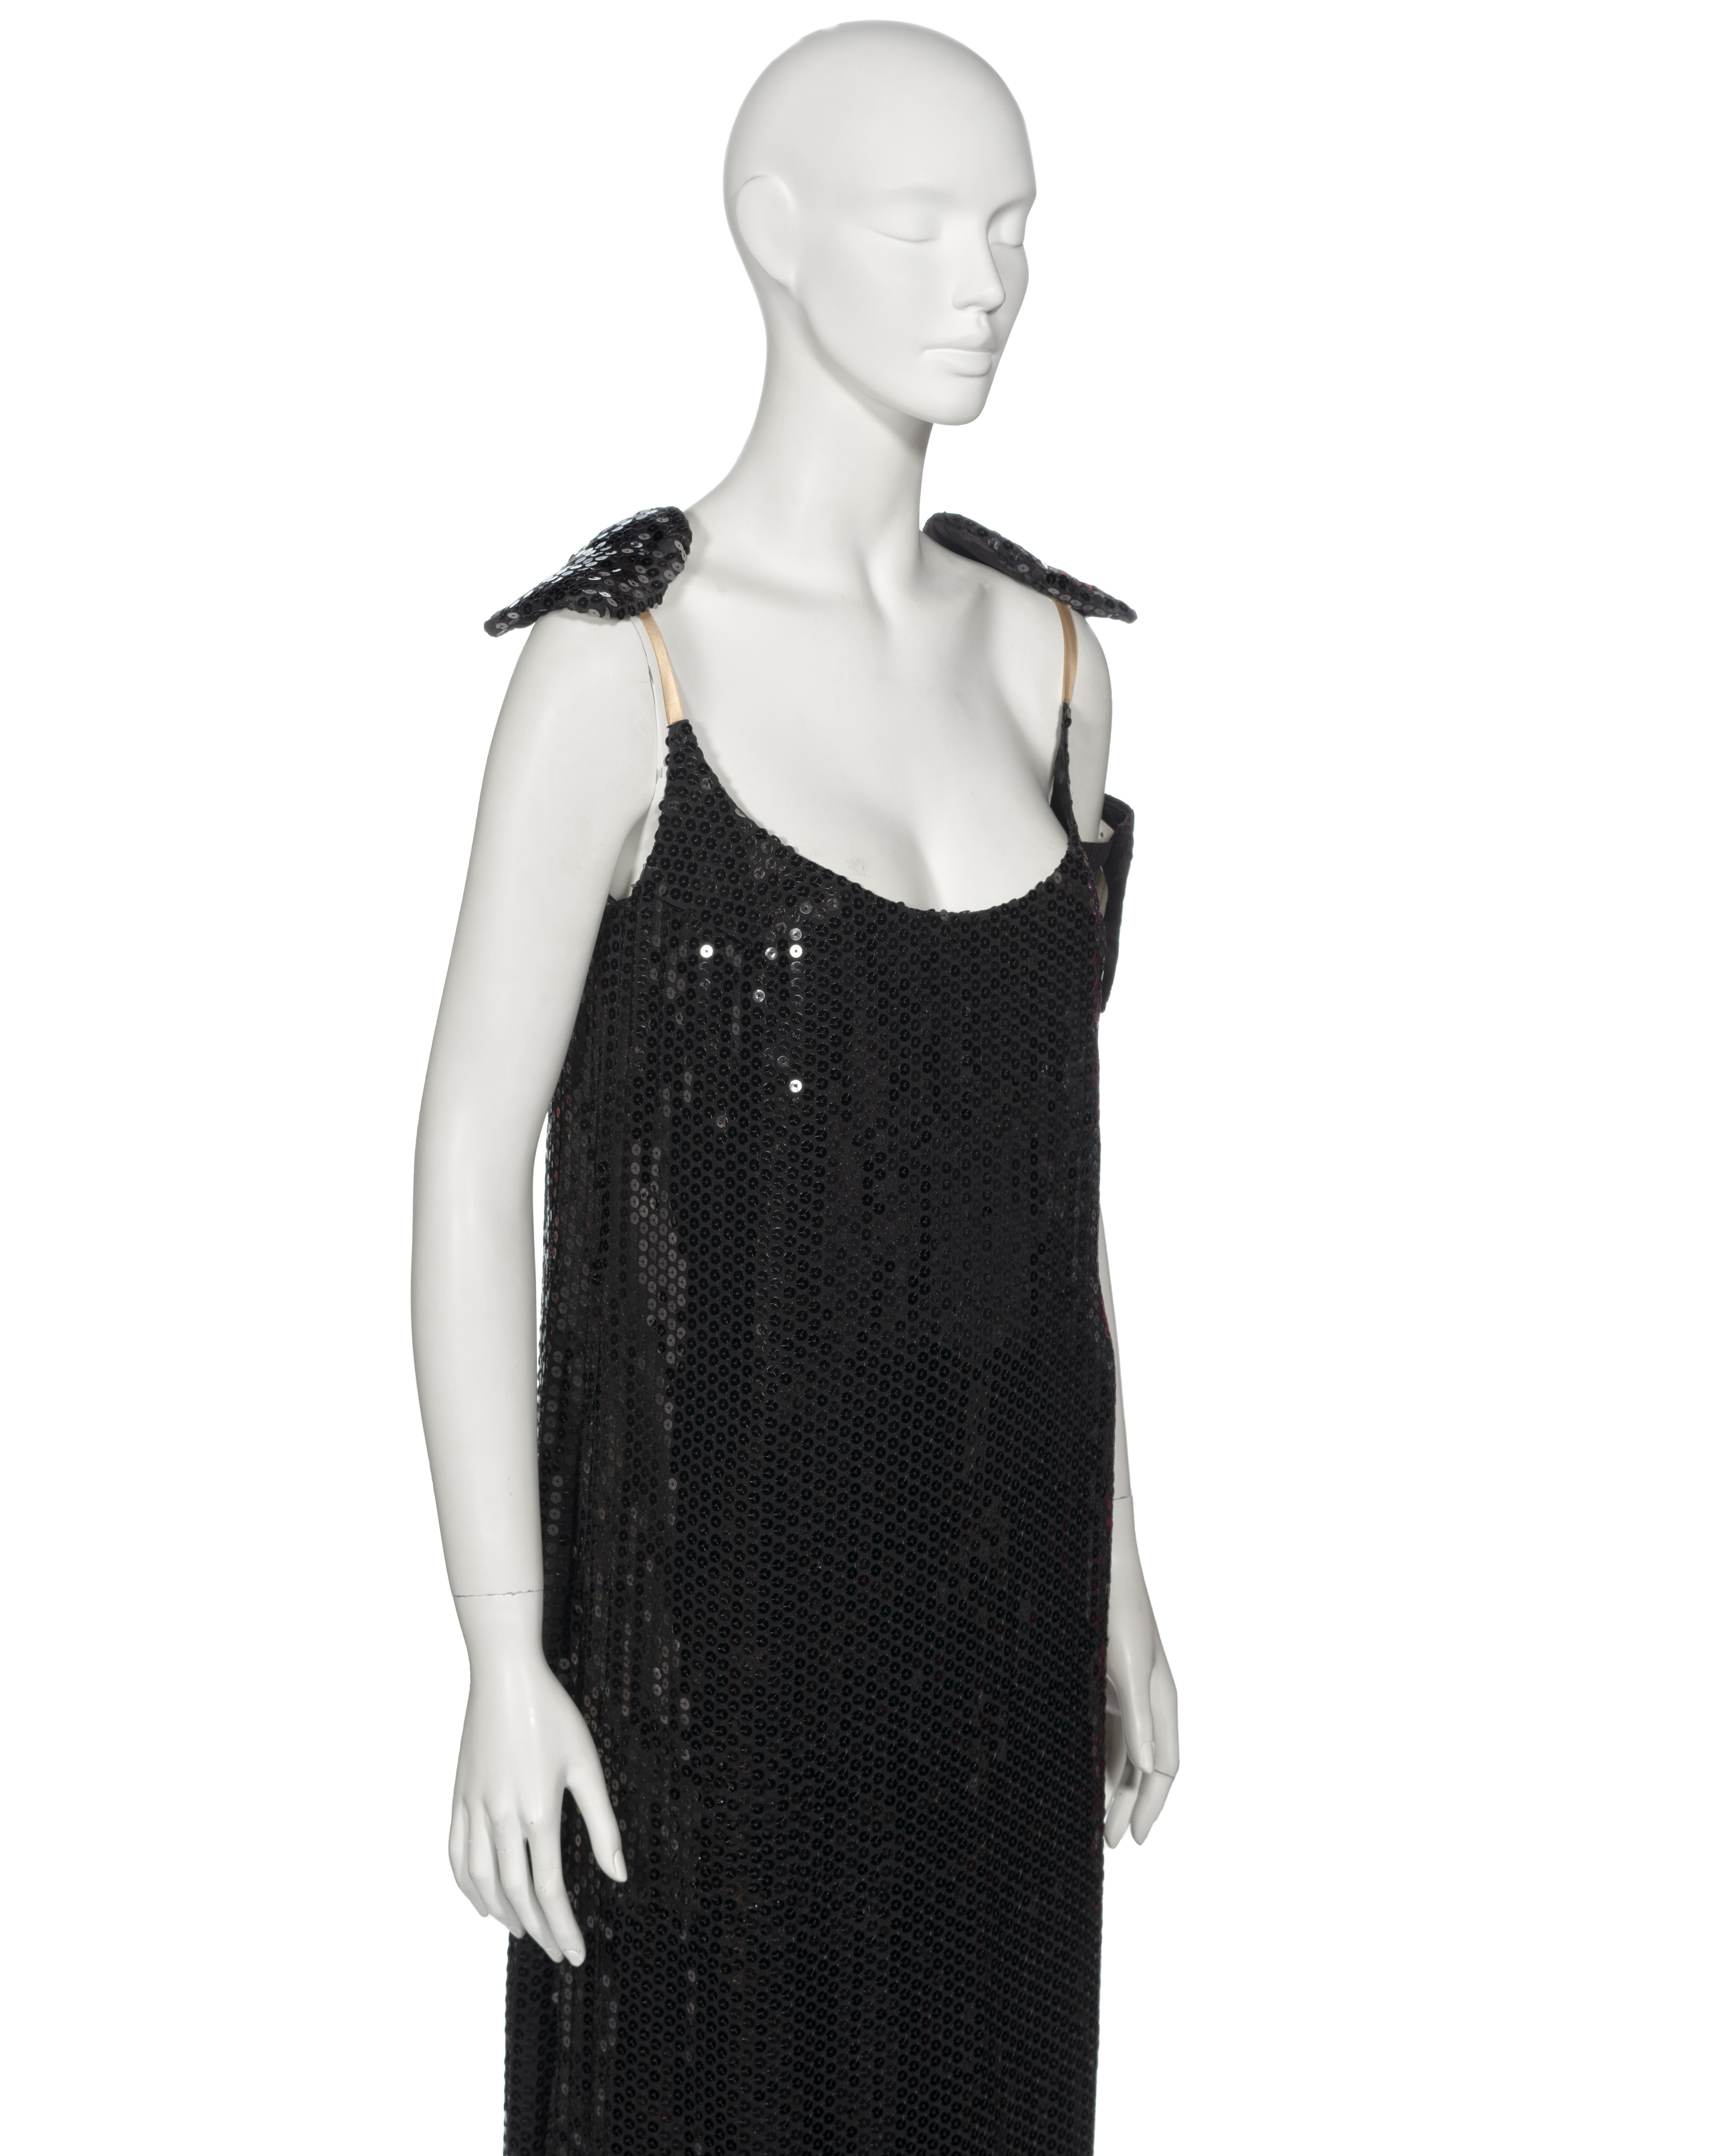 Helmut Lang Black Sequin Evening Dress With Armband, fw 1999 For Sale 3